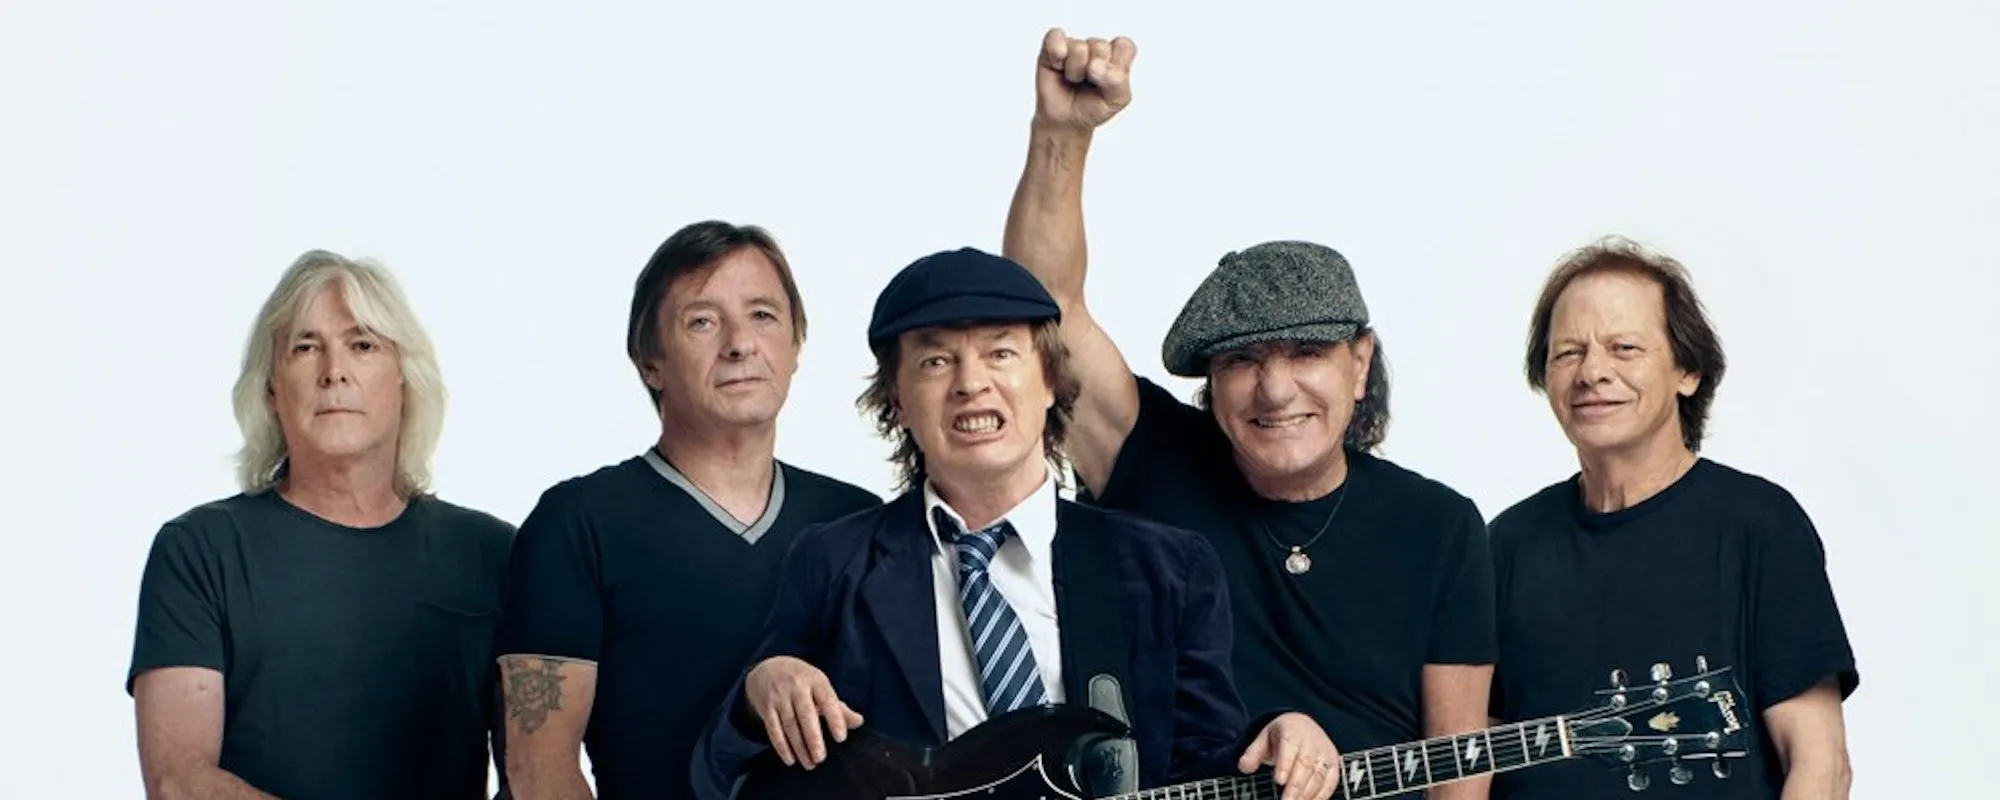 Bagpipes, Farm Tools, and a Buddhist Monk: 7 Crazy Covers of AC/DC Classic “Thunderstruck”